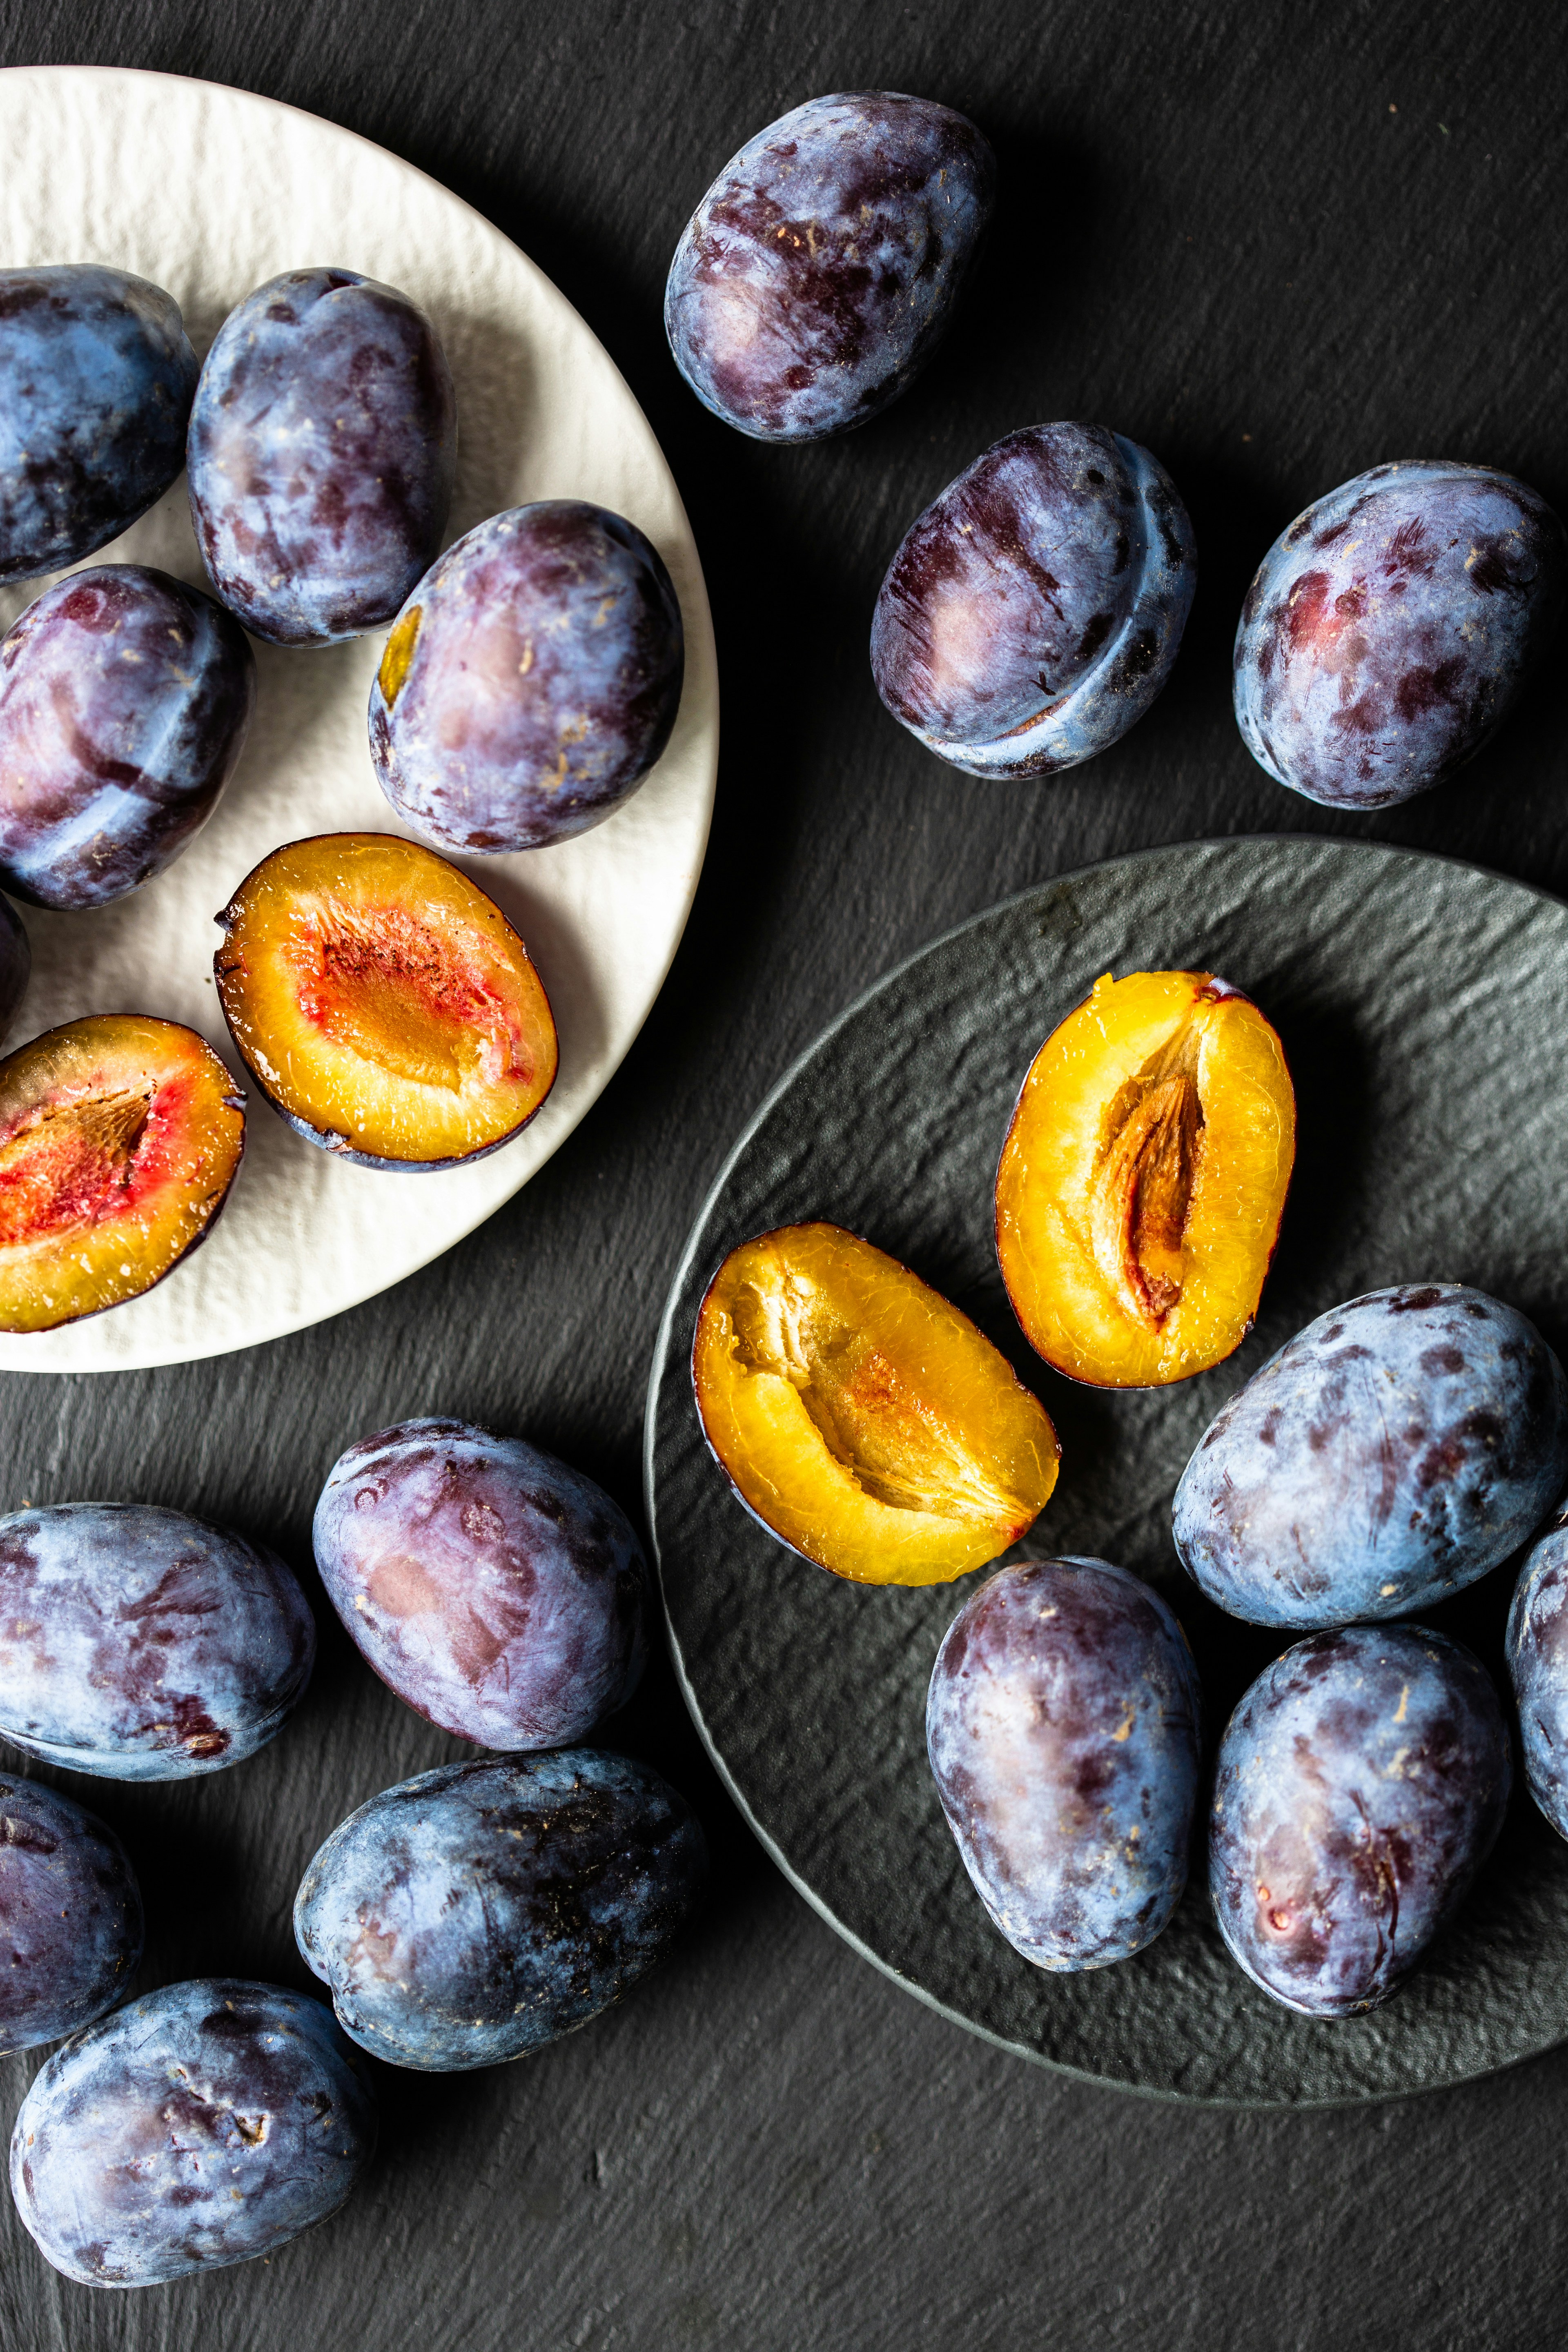 Ripe fresh organic plums on a dark kitchen counter on two textured plates. Blue and purple on black and white.